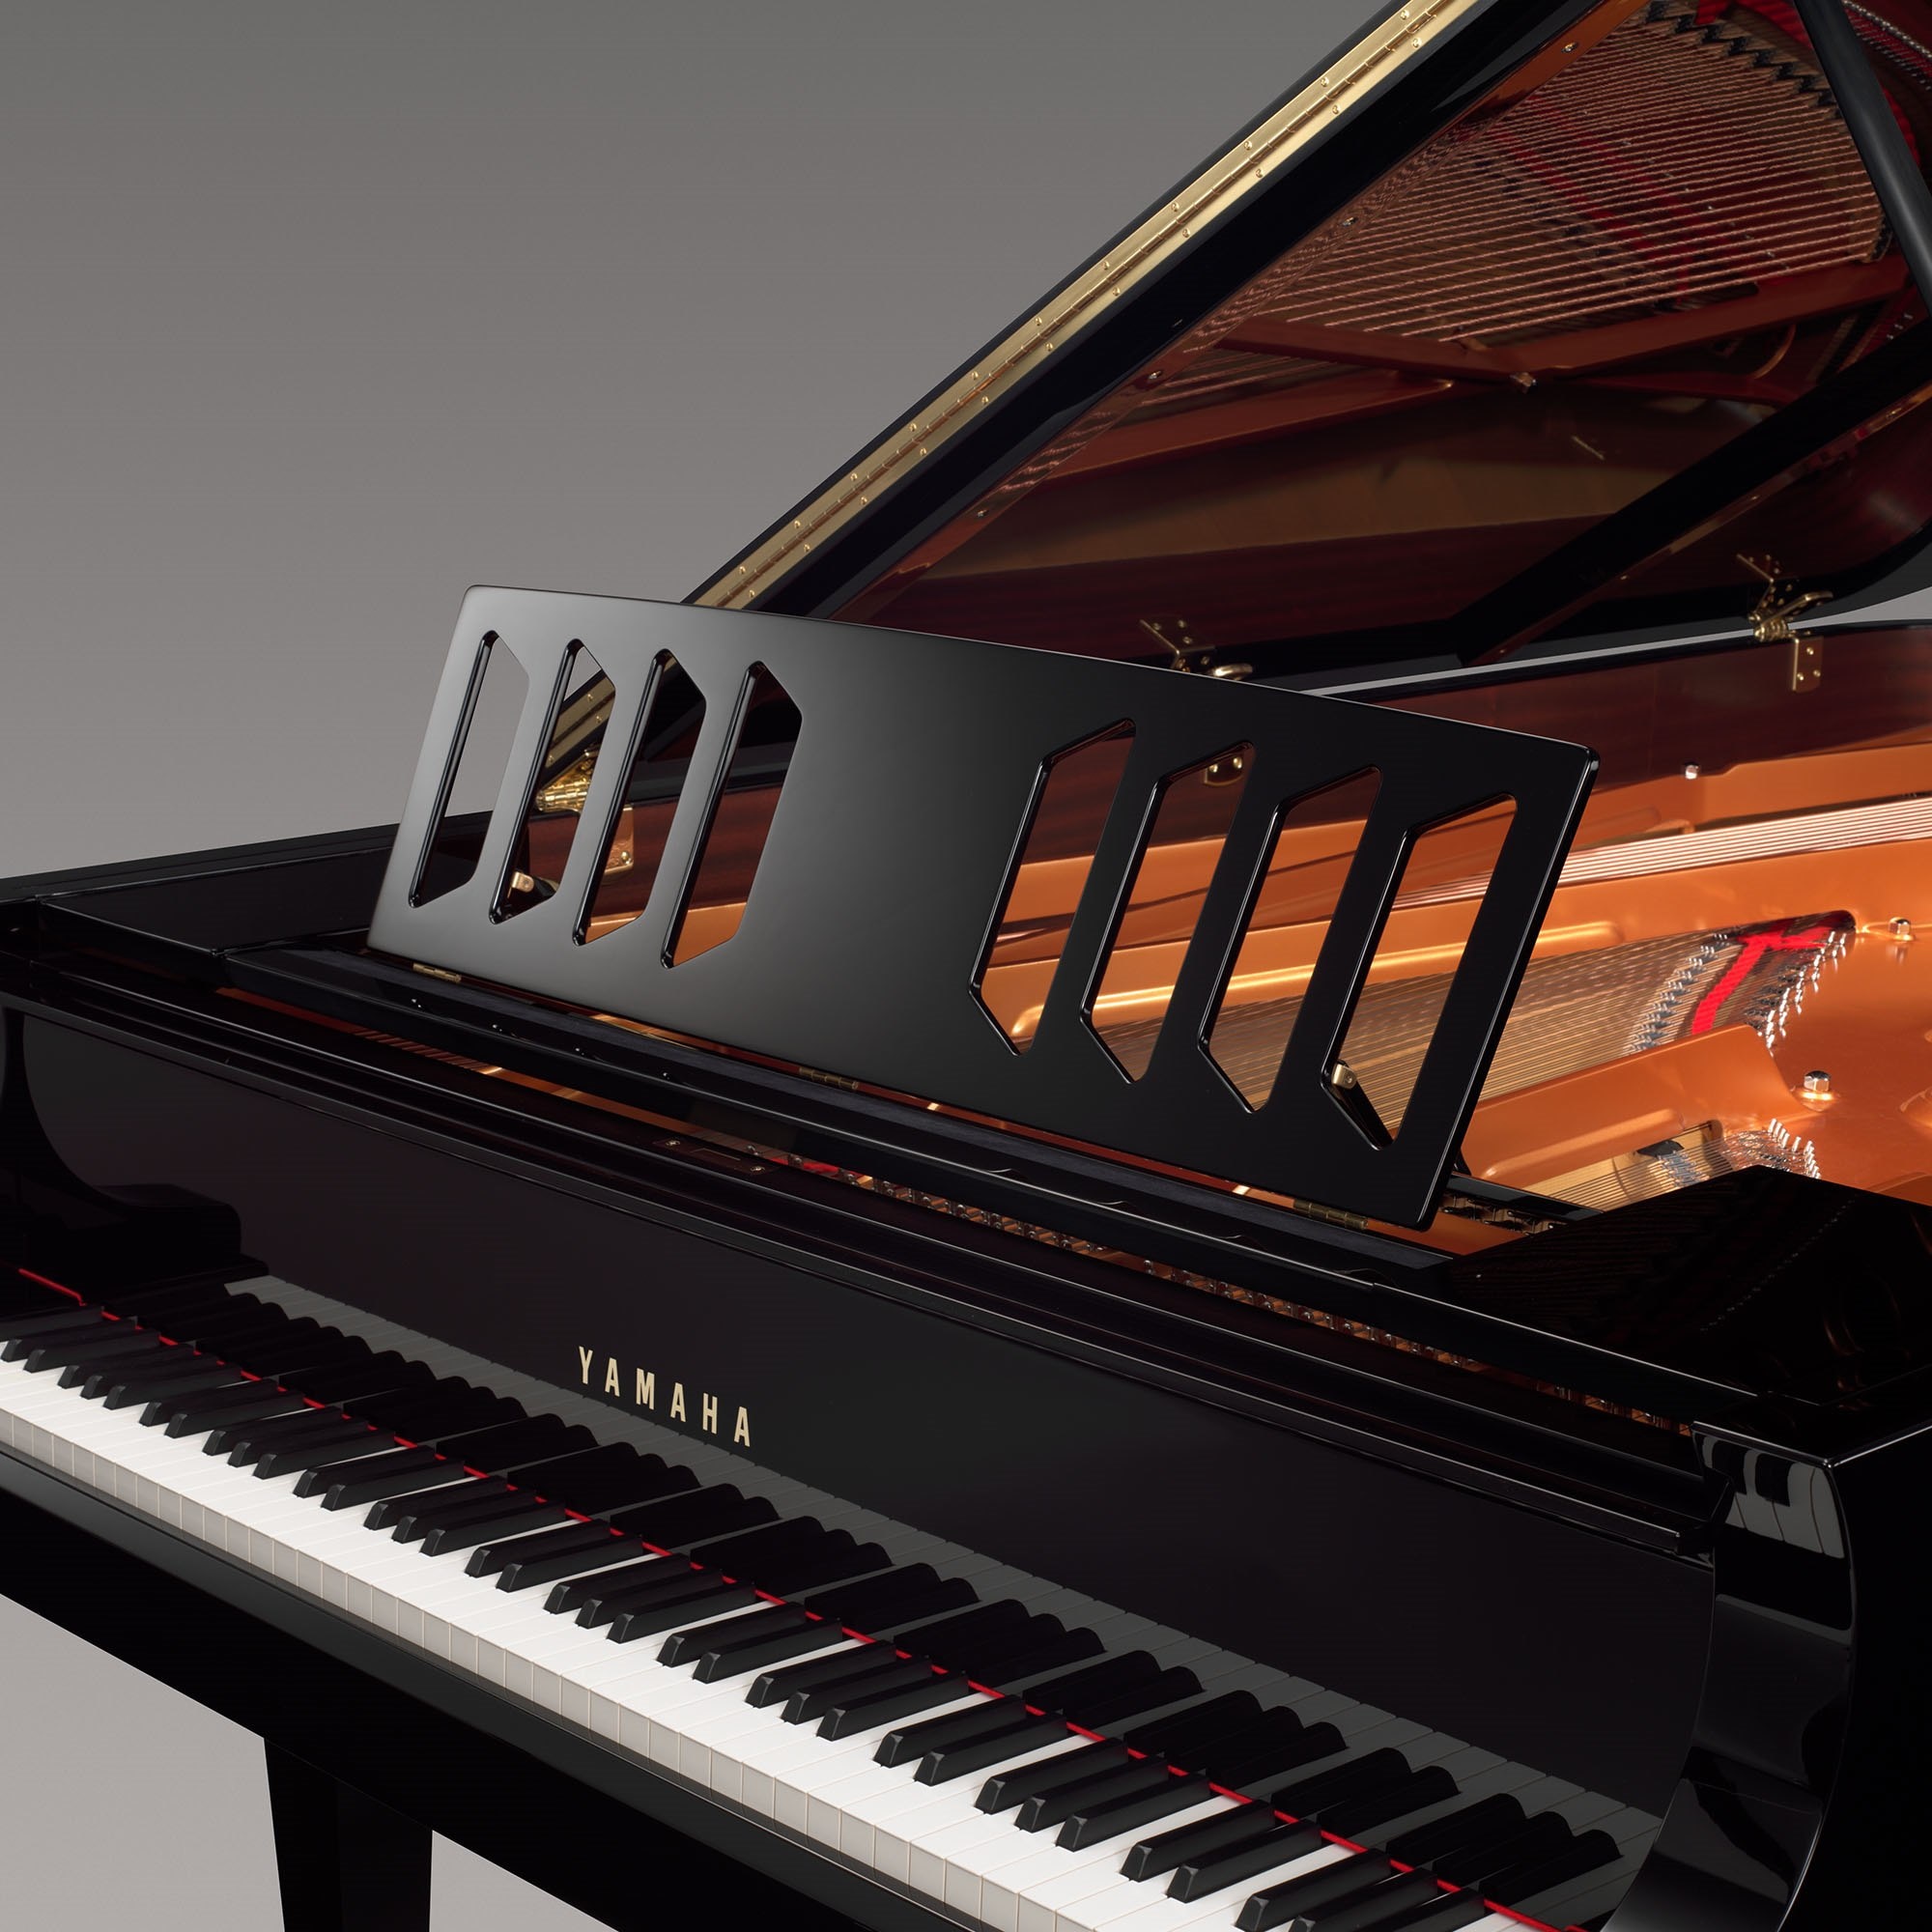 CFX - Accessories - GRAND PIANOS - - Musical Instruments - Products - Yamaha - Other European Countries